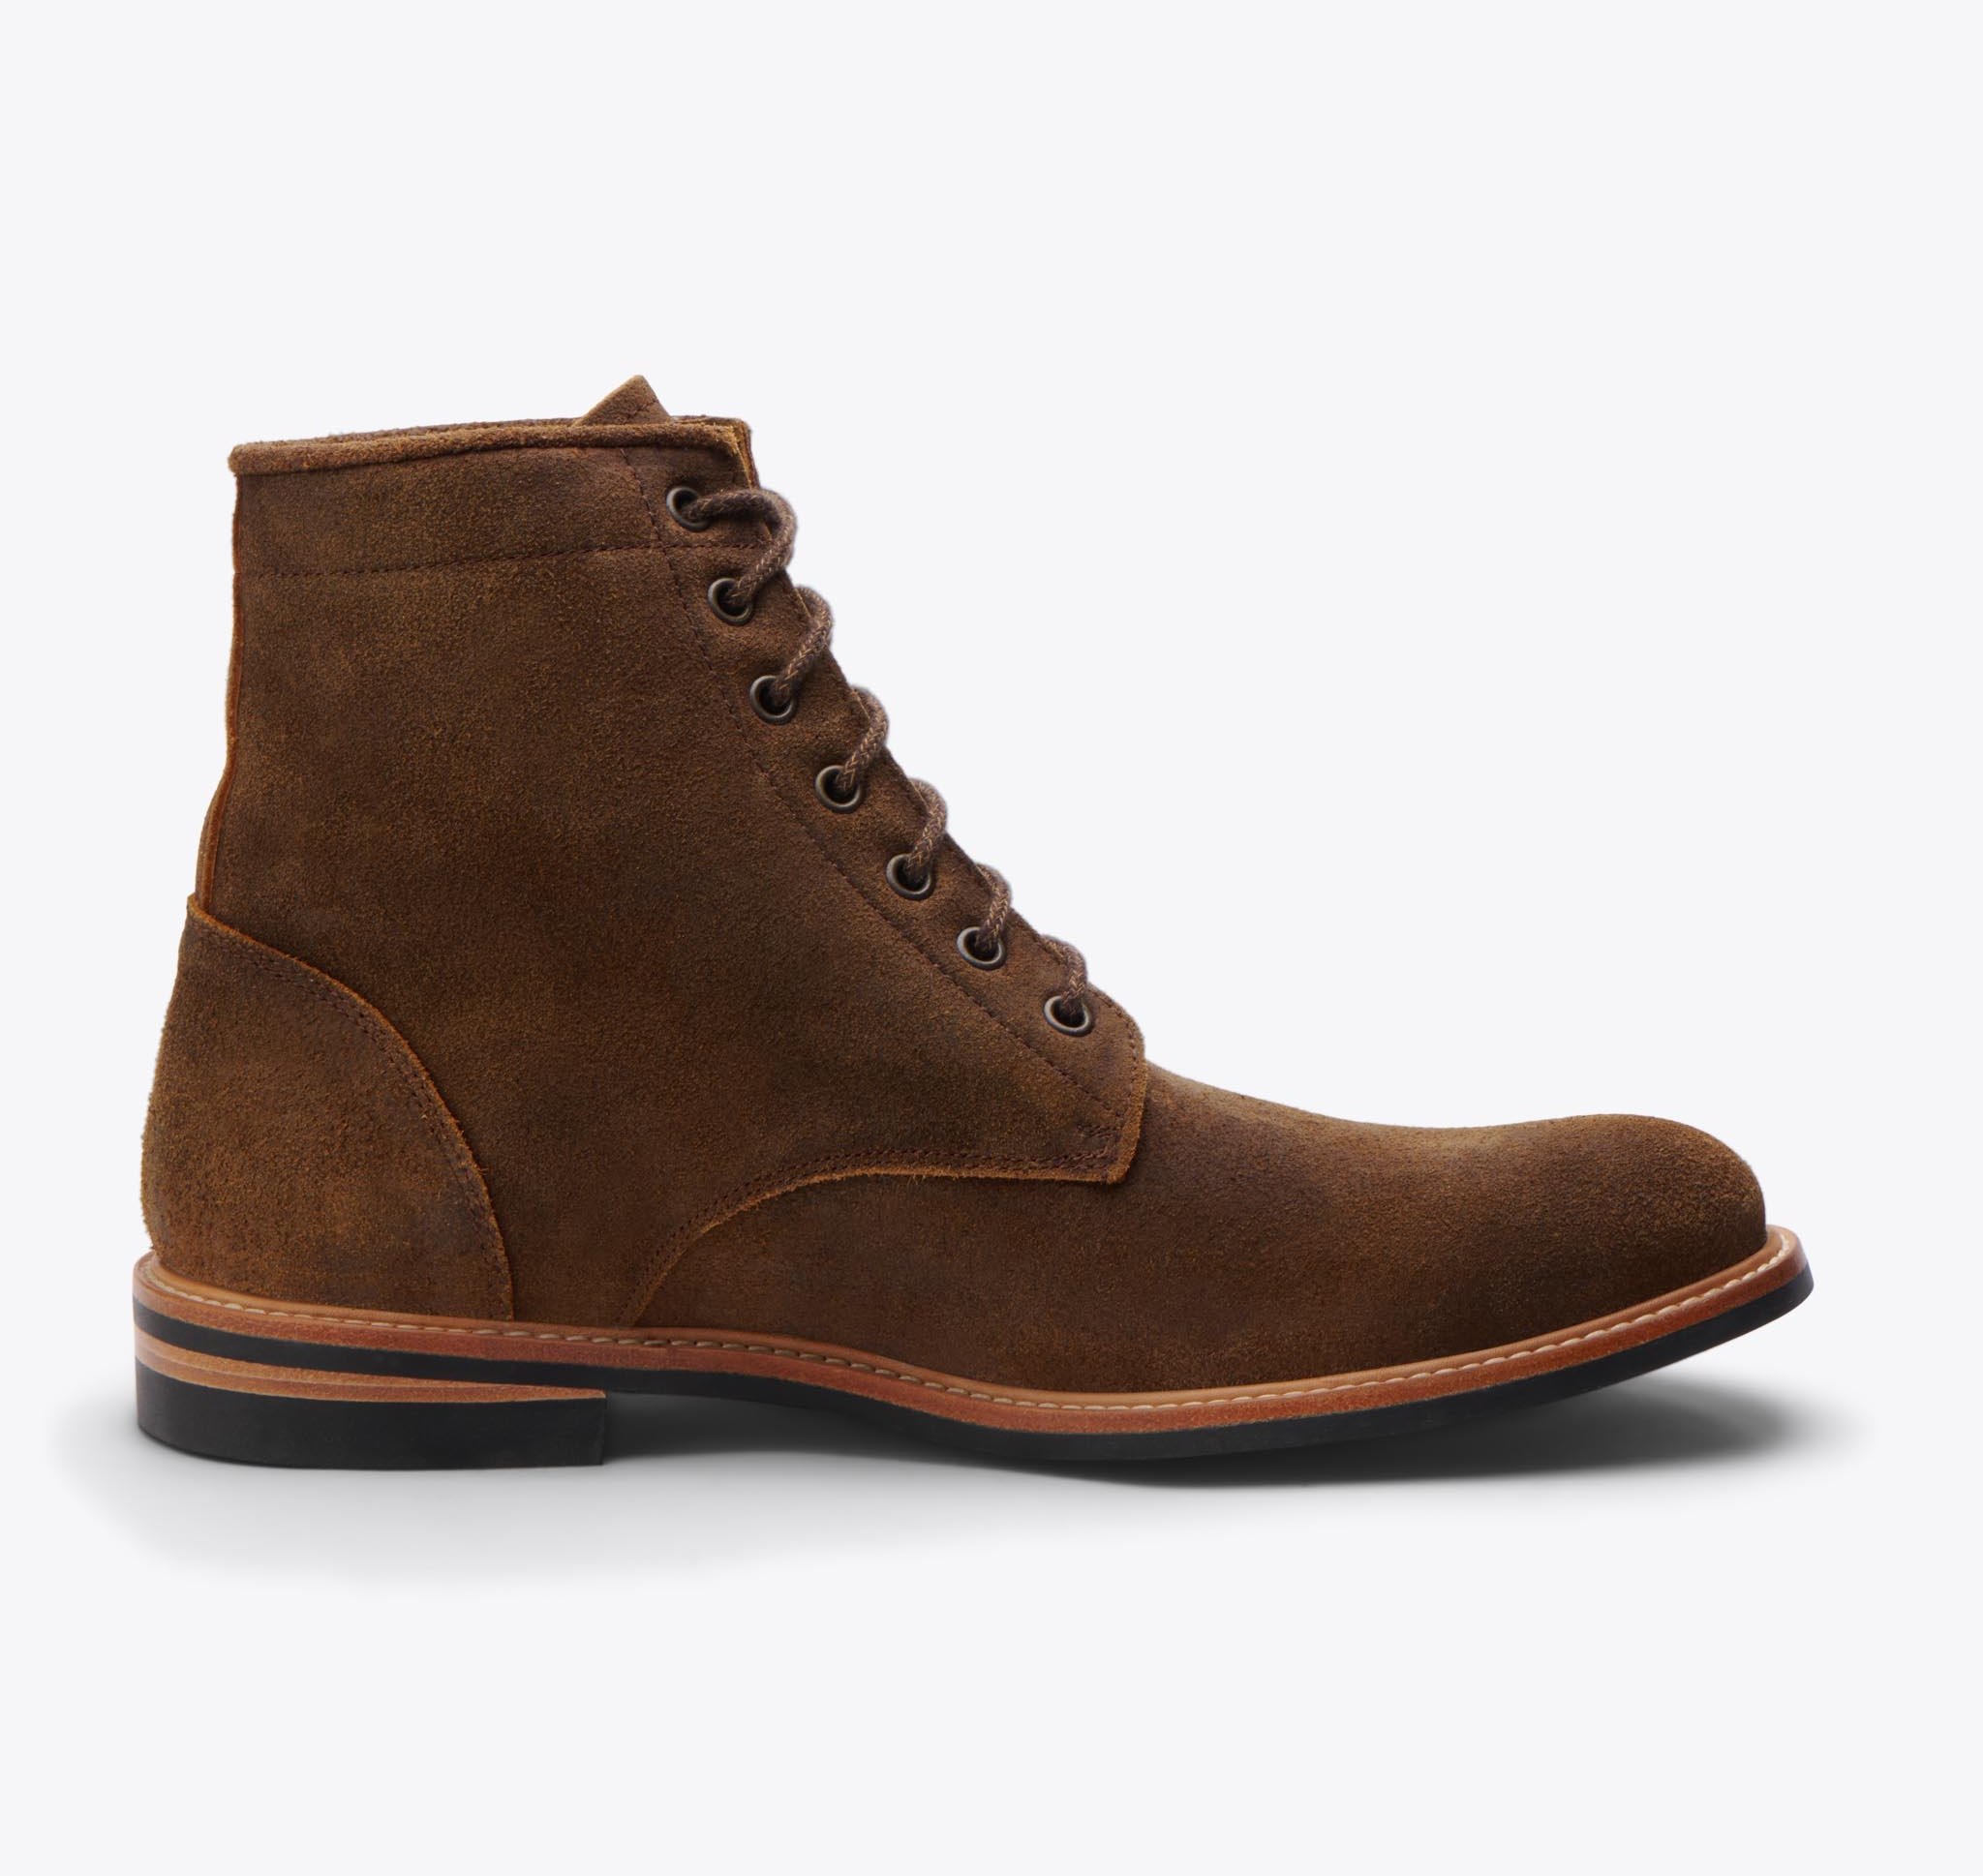 Nisolo All-Weather Andres Boot Waxed Brown - Every Nisolo product is built on the foundation of comfort, function, and design. 